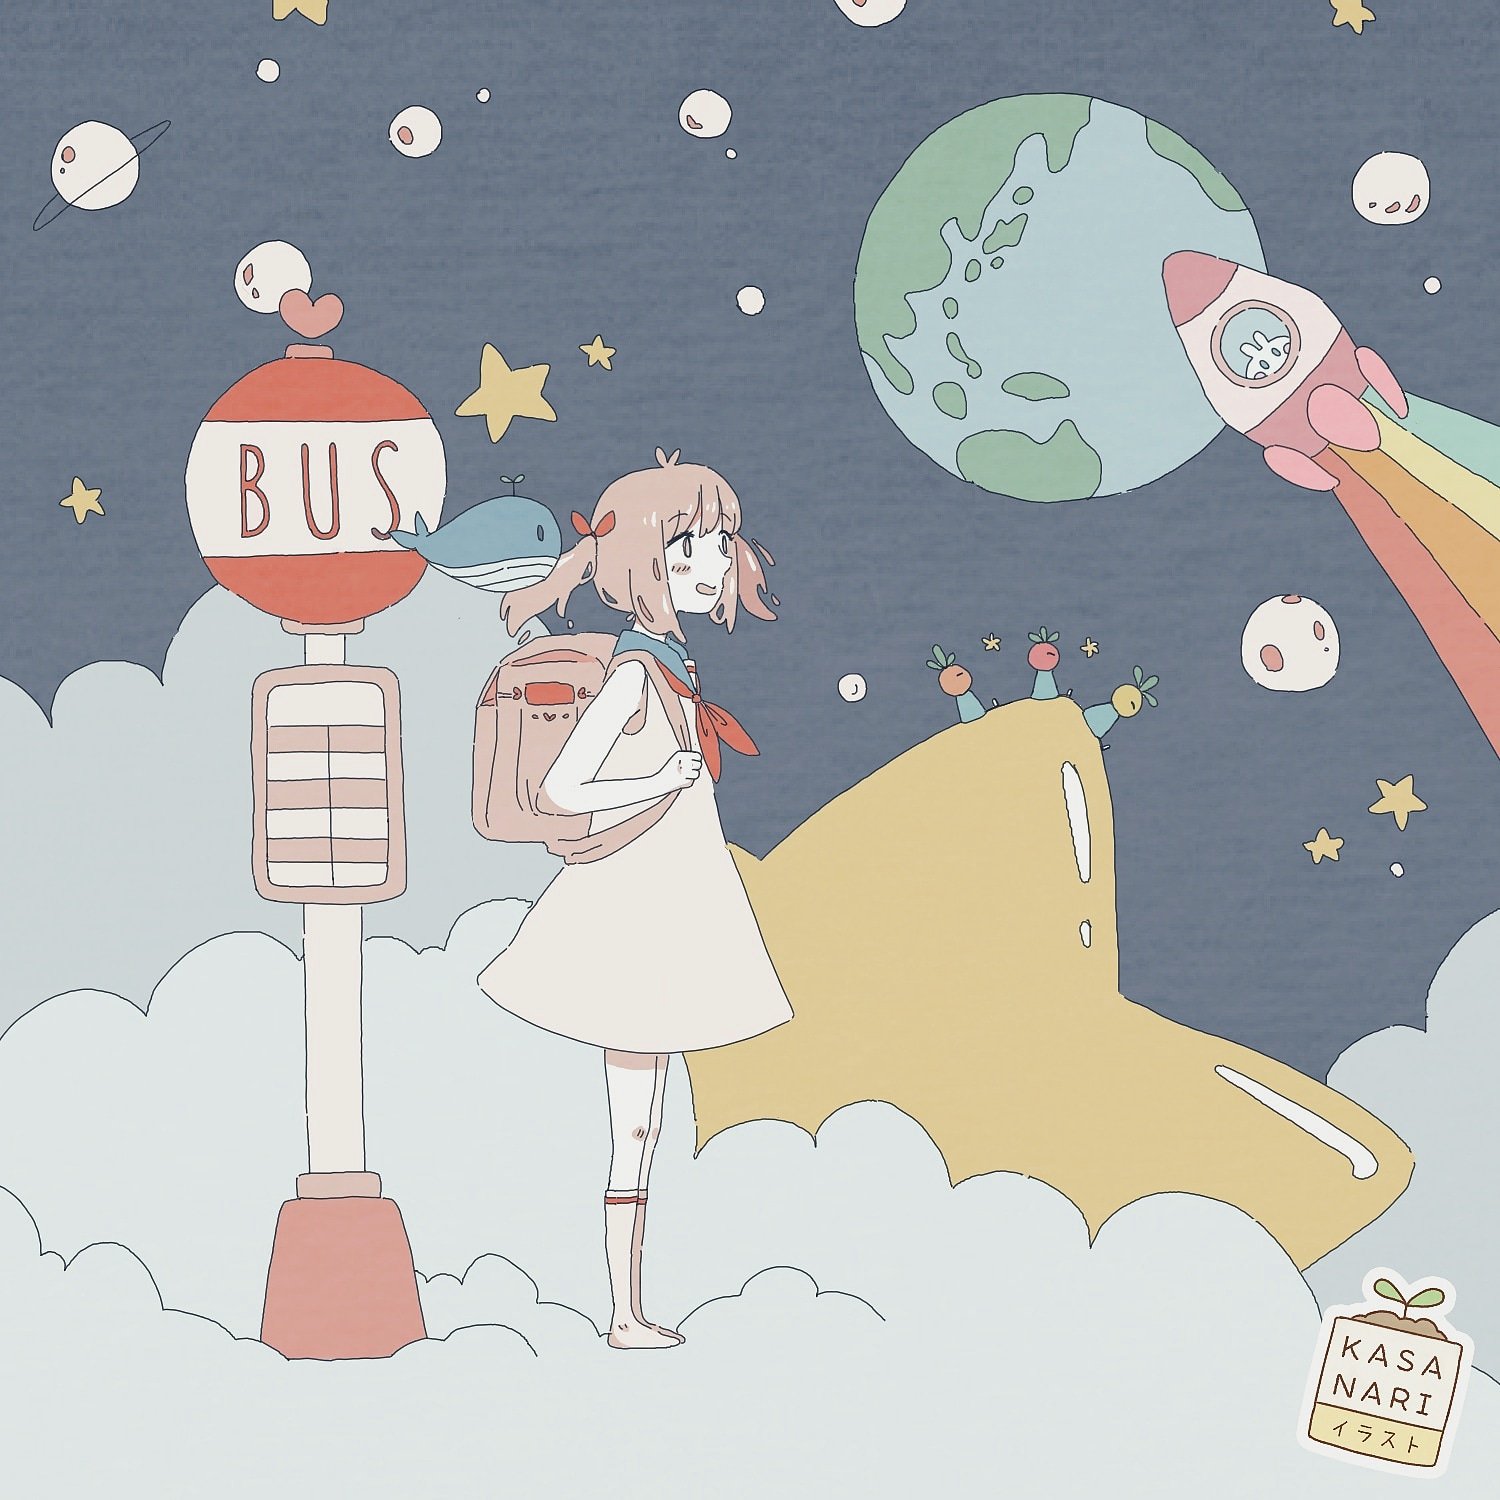 N A R I 18 04 29 Waiting For The Bus To Take Her To School 学校に行くバスを待っています Space Bus Waiting School Earth Cloud Whale Rocket Star Pastel Kawaii Drawing Illustration